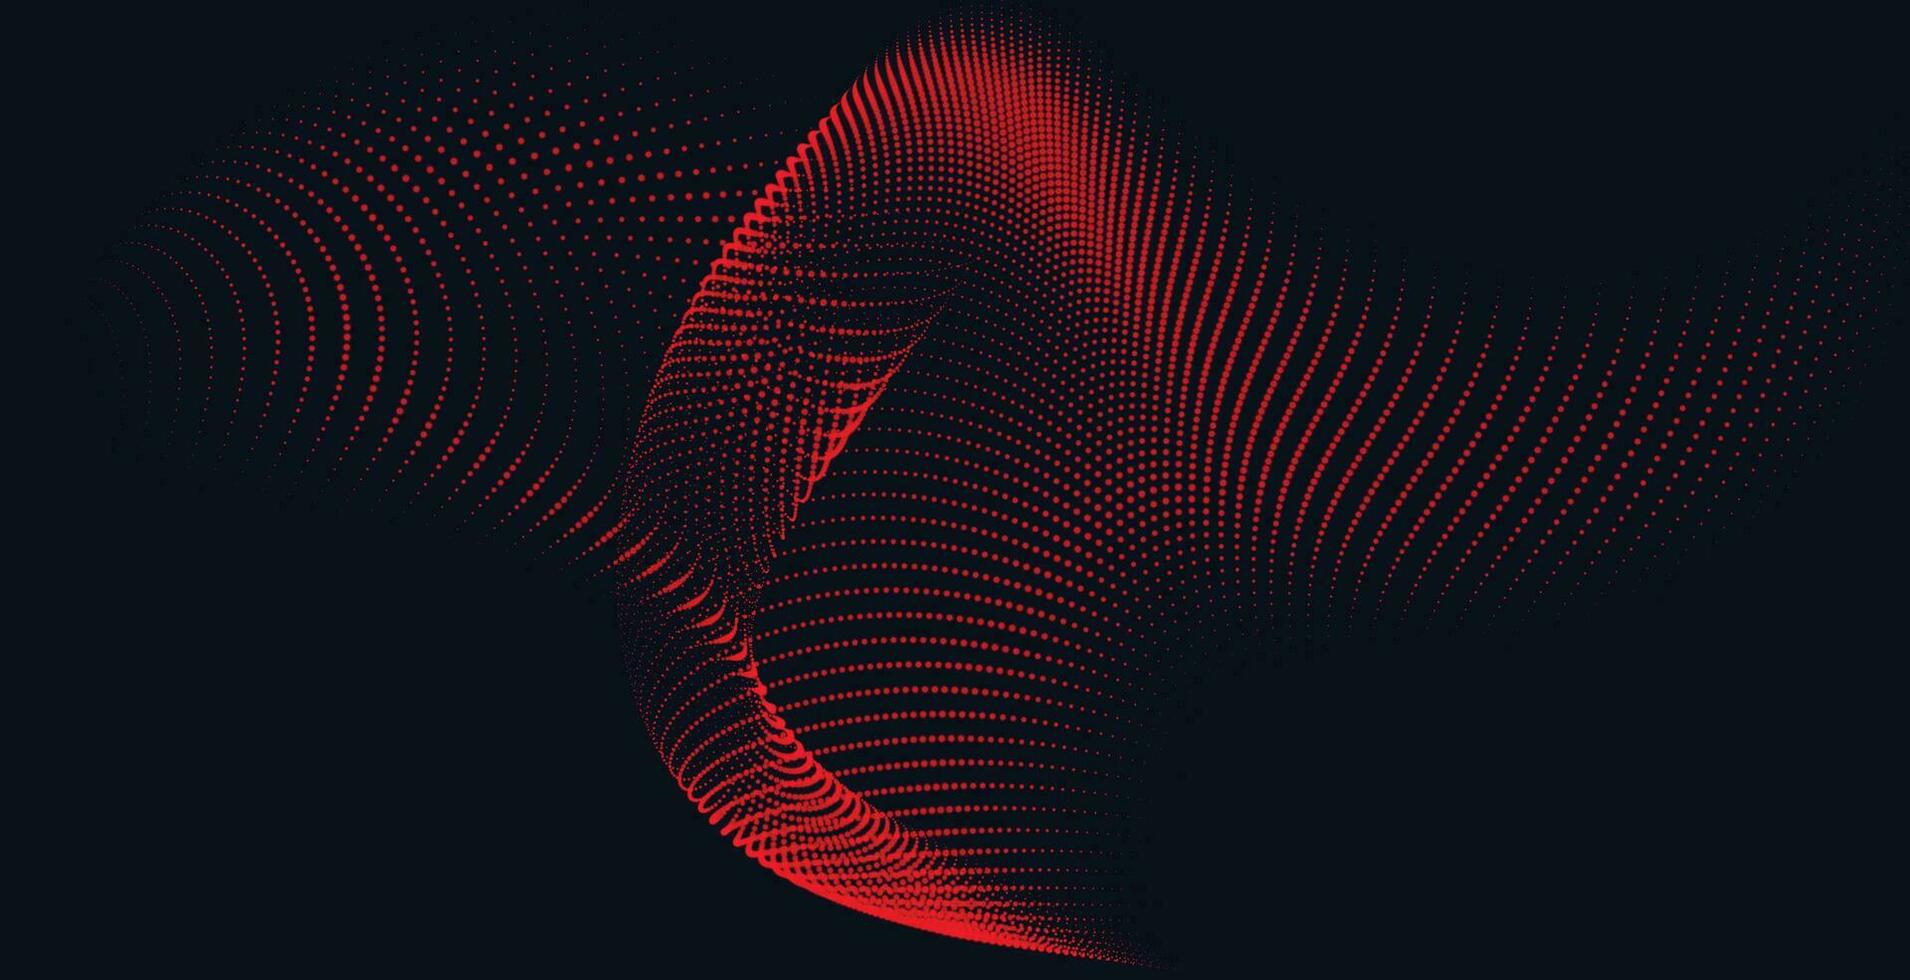 Abstract gradient wave of particles. Big data. Digital background. Futuristic vector illustration.